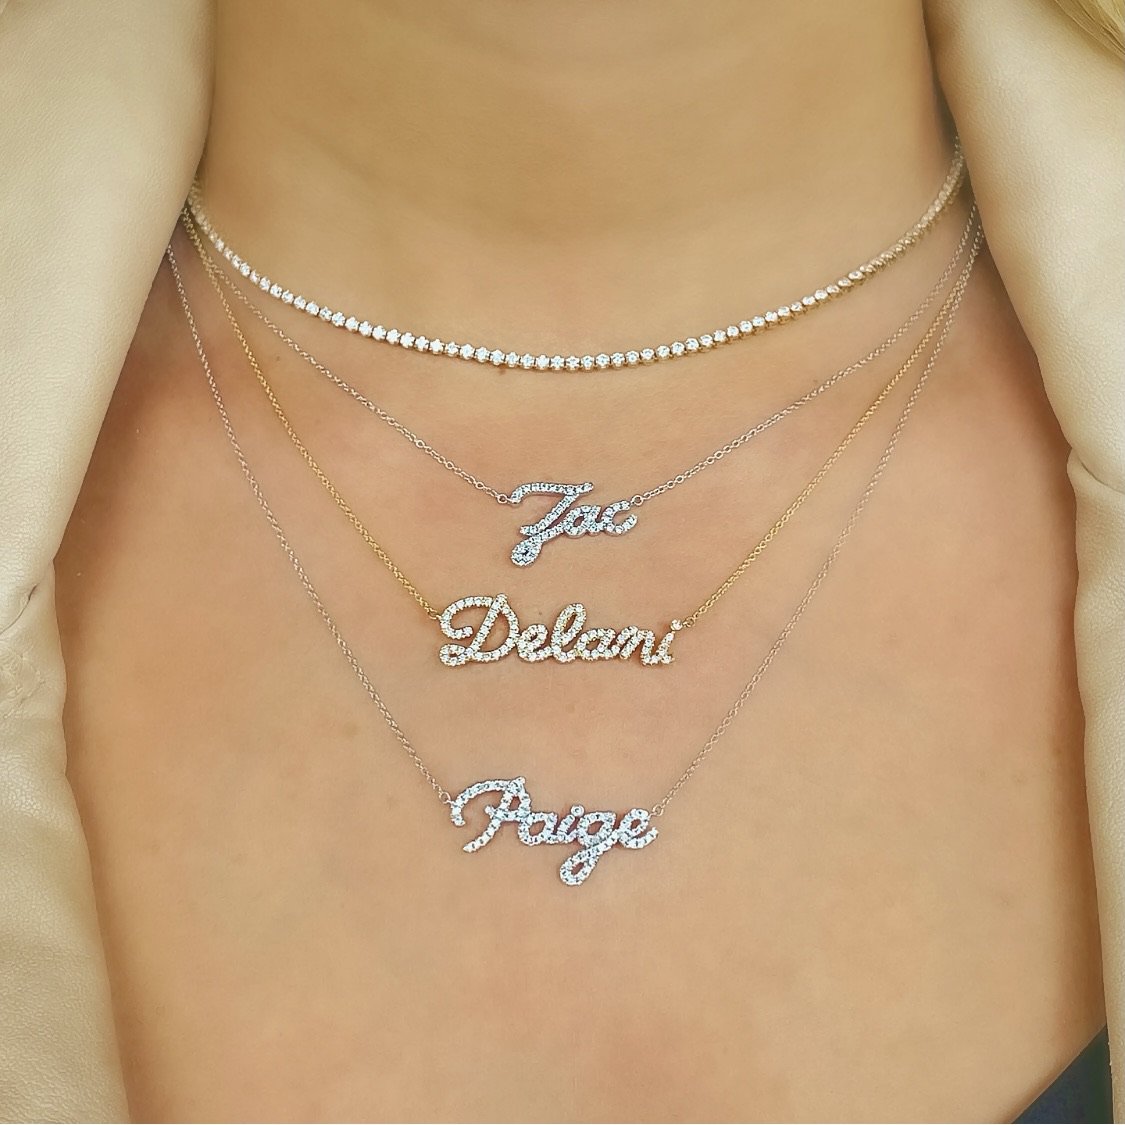 Personalized Diamond Nameplate Necklace - 7 Letters - LANA